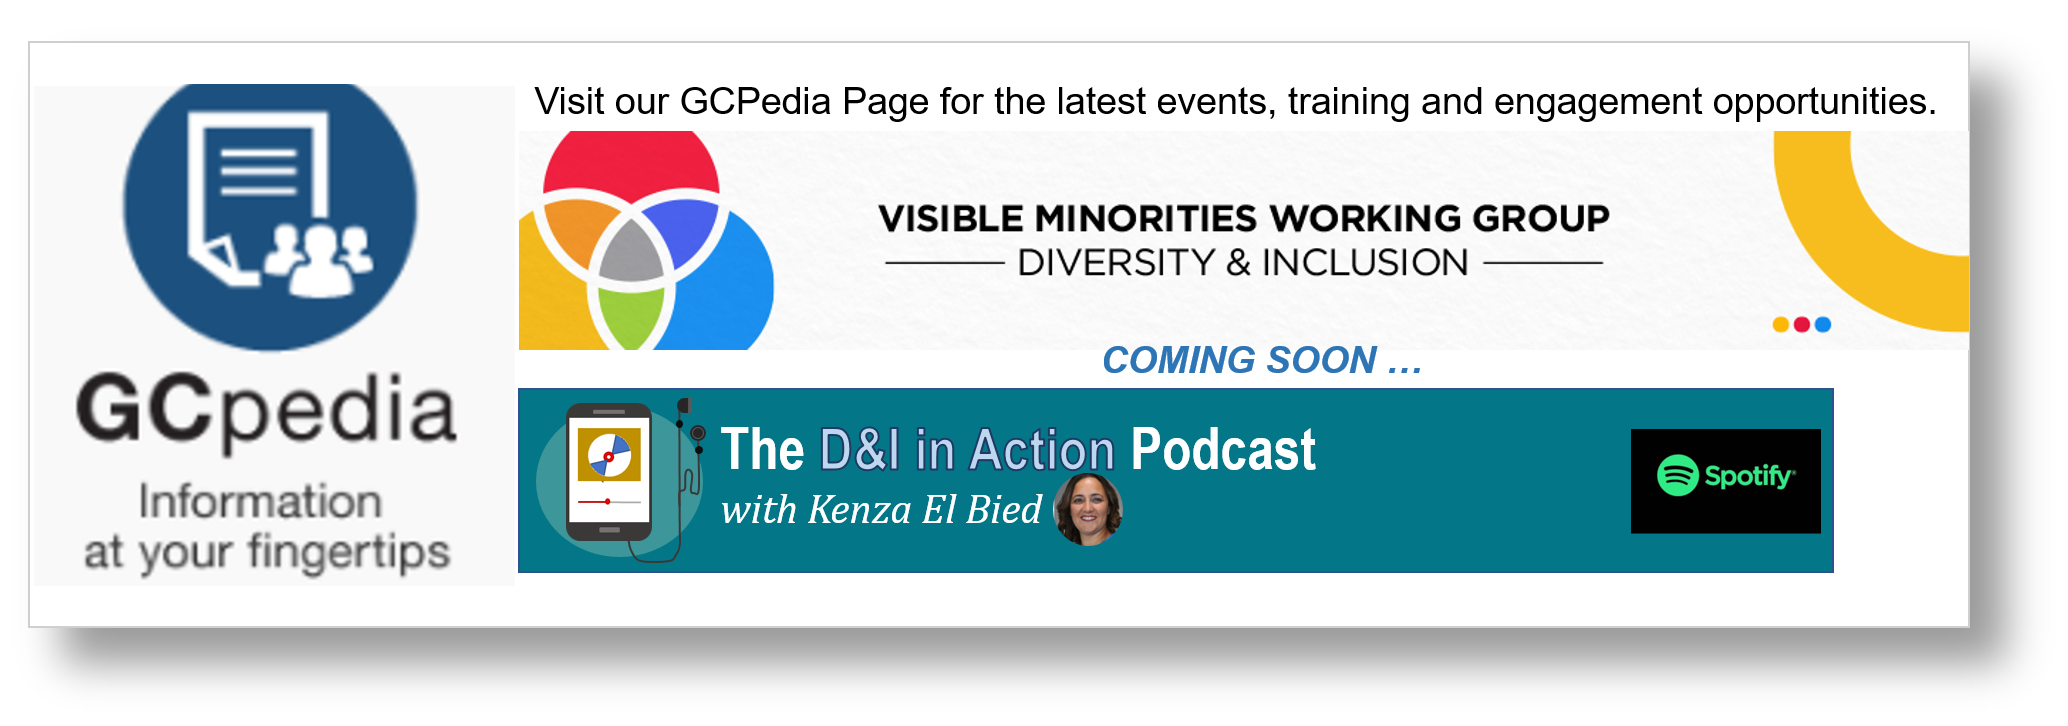 Visit the Visible Minority Working Group GCPedia Page for more on our work.